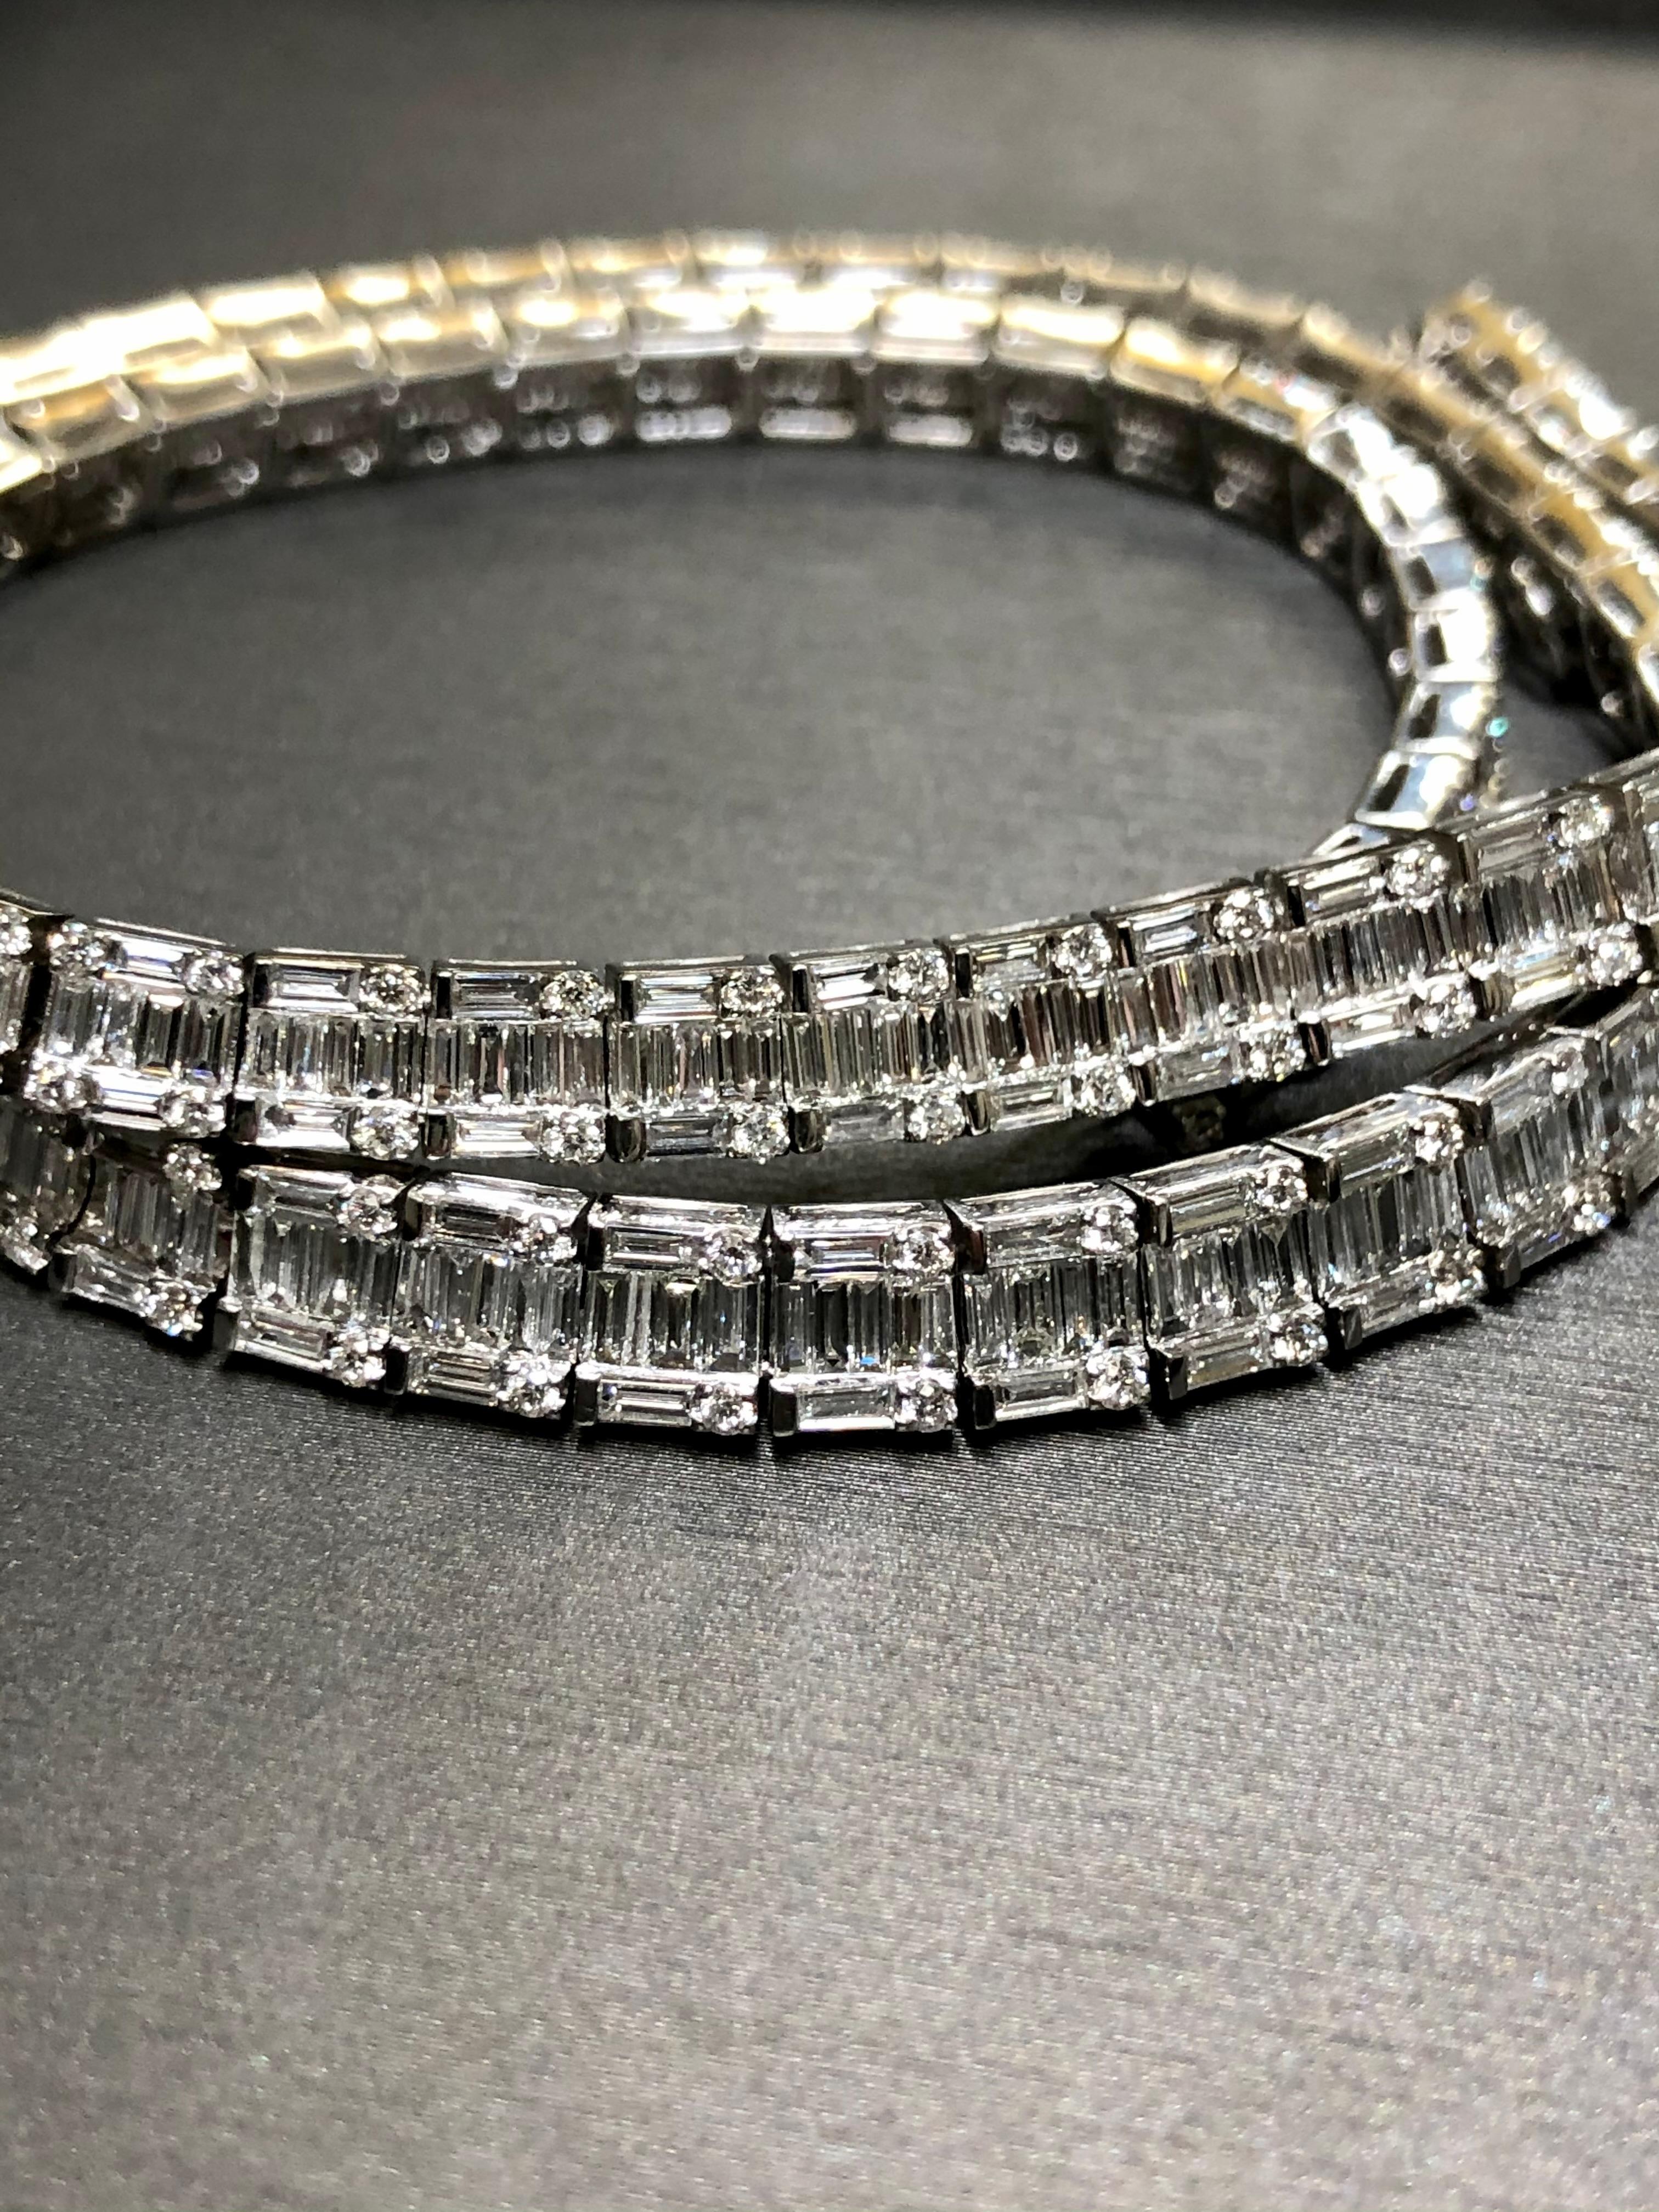 
An absolutely stunning piece that makes no excuses… ZERO. Done in 18K white gold, this incredible necklace is set with approximately and conservatively 35.20cttw in G-I color Vs1-2 clarity baguette and round diamonds. There are no gaps, no chips…